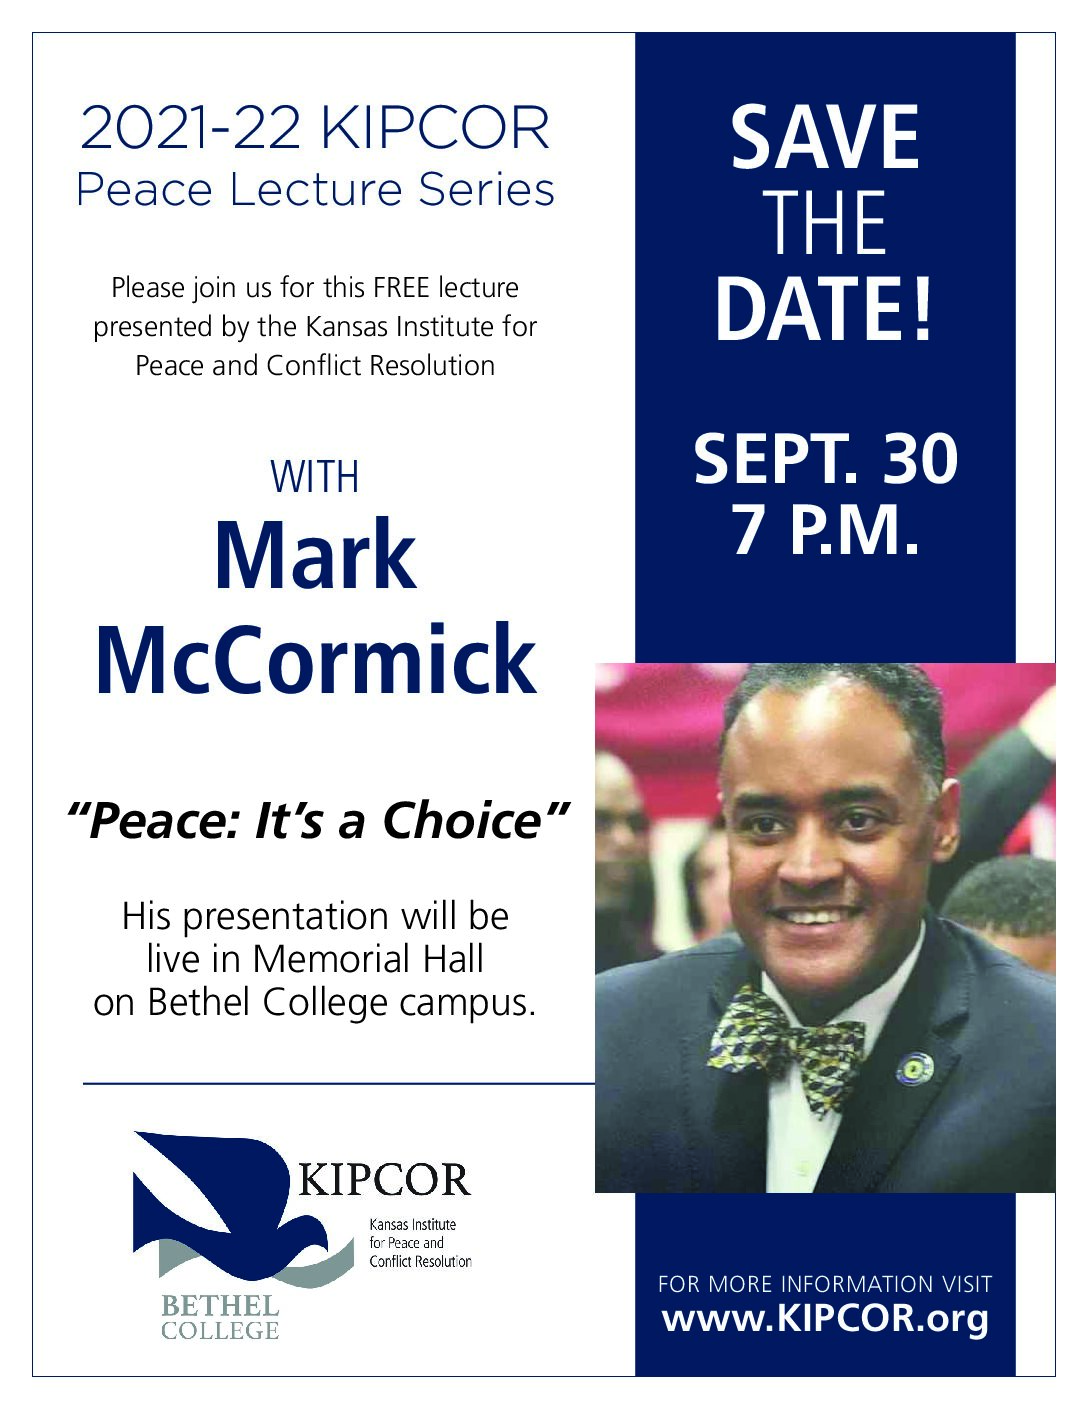 Click here for information about Mark McCormicks Peace Lecture TONIGHT!